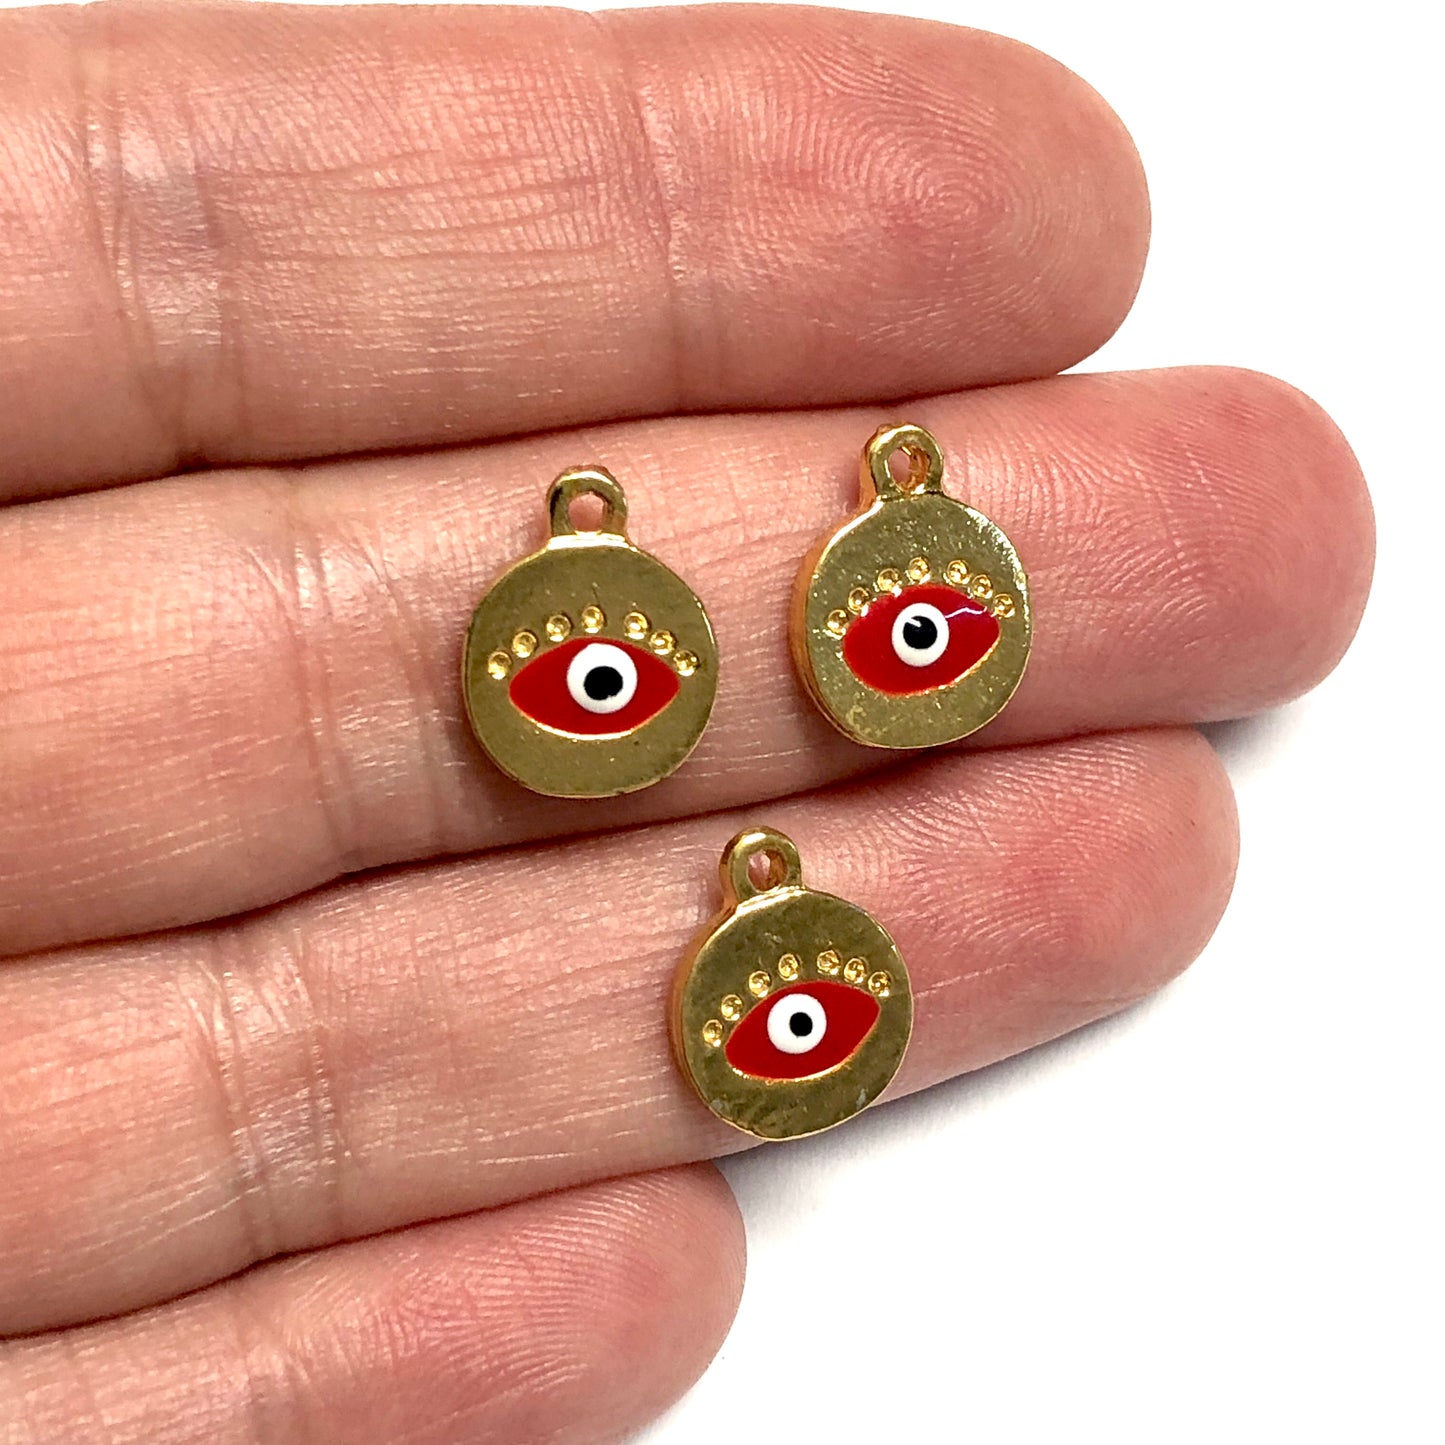 Gold Plated Round Evil Eye Eye Shaking Apparatus - Red